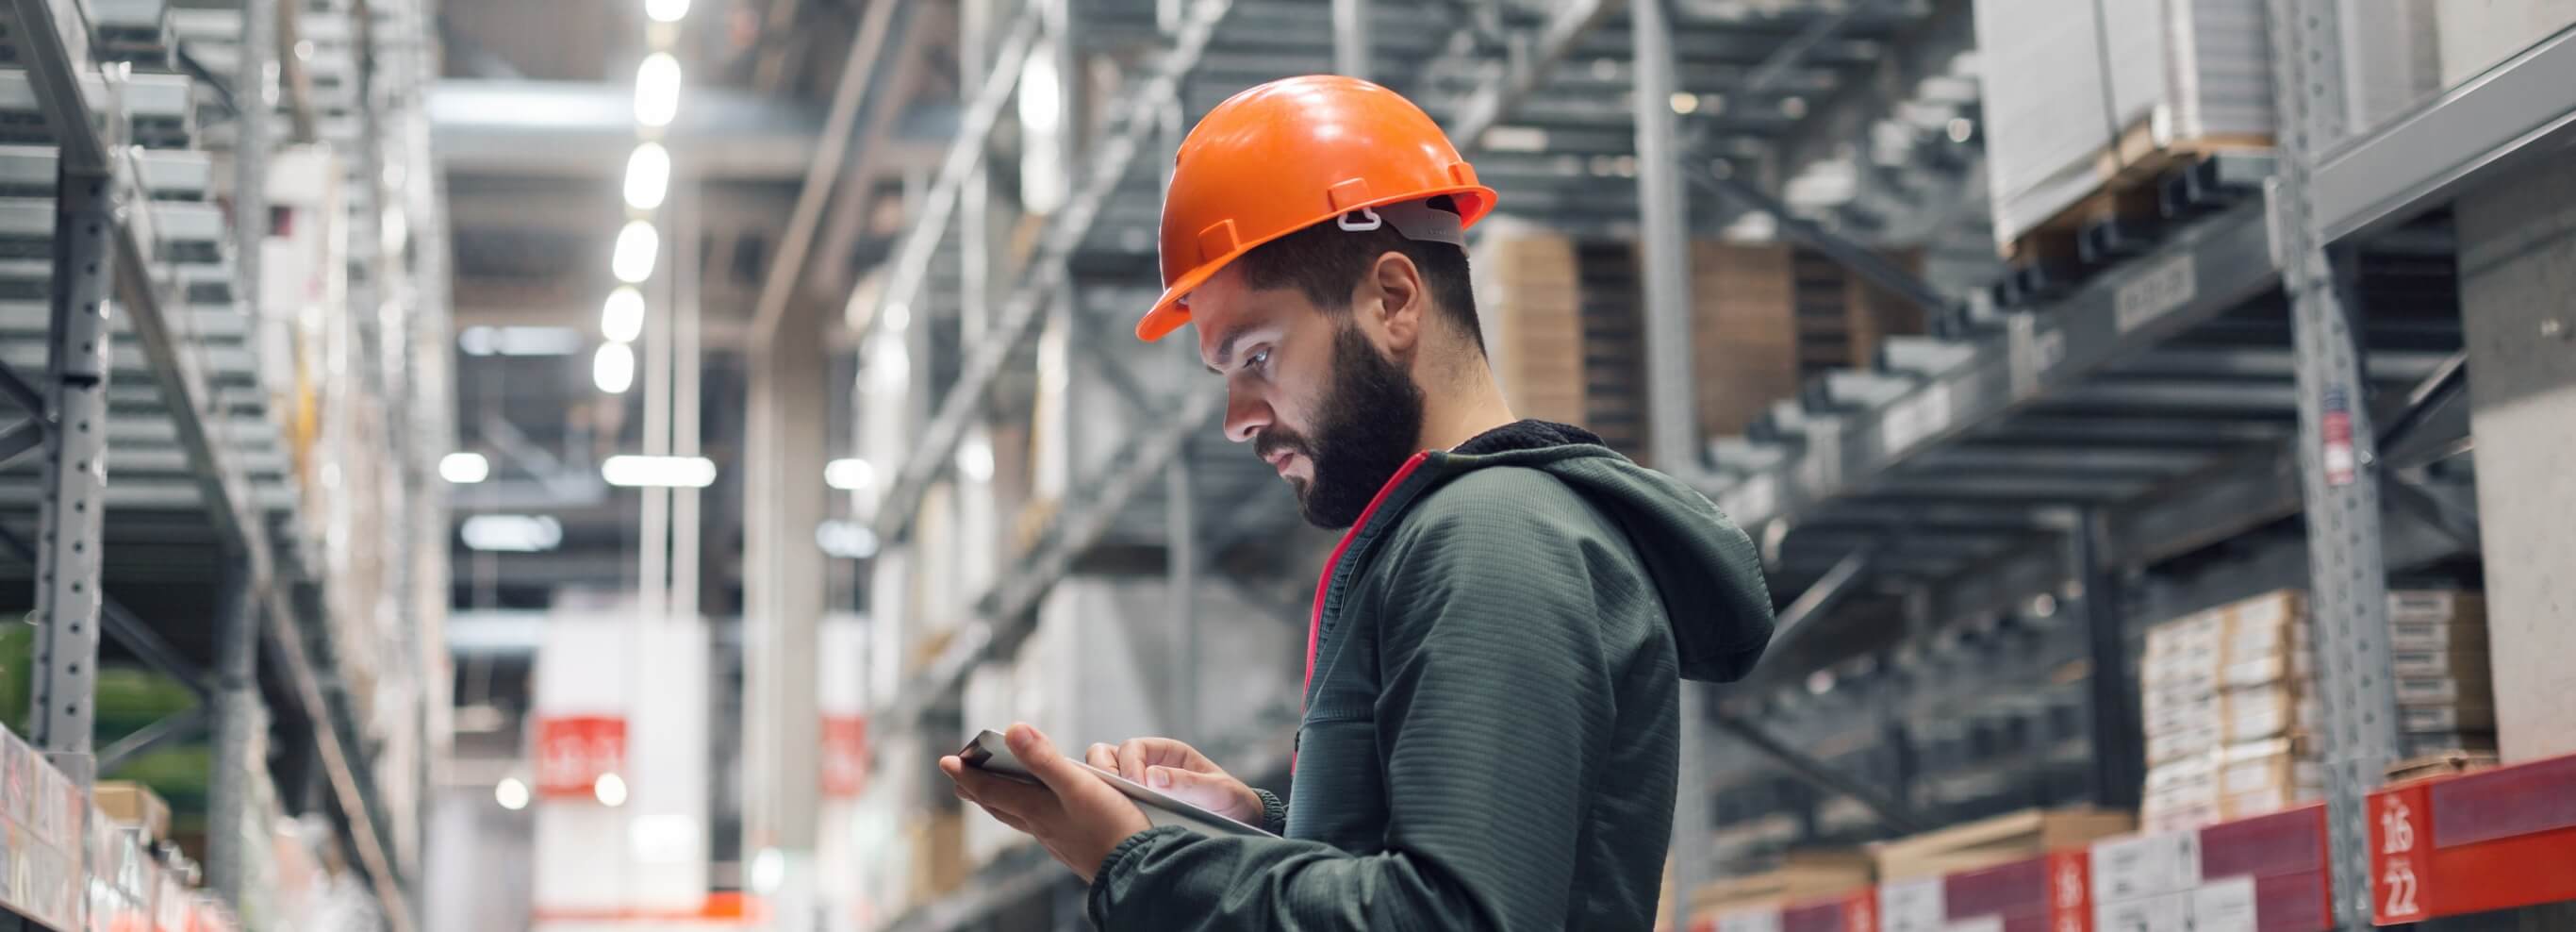 construction worker in warehouse looking at iPad